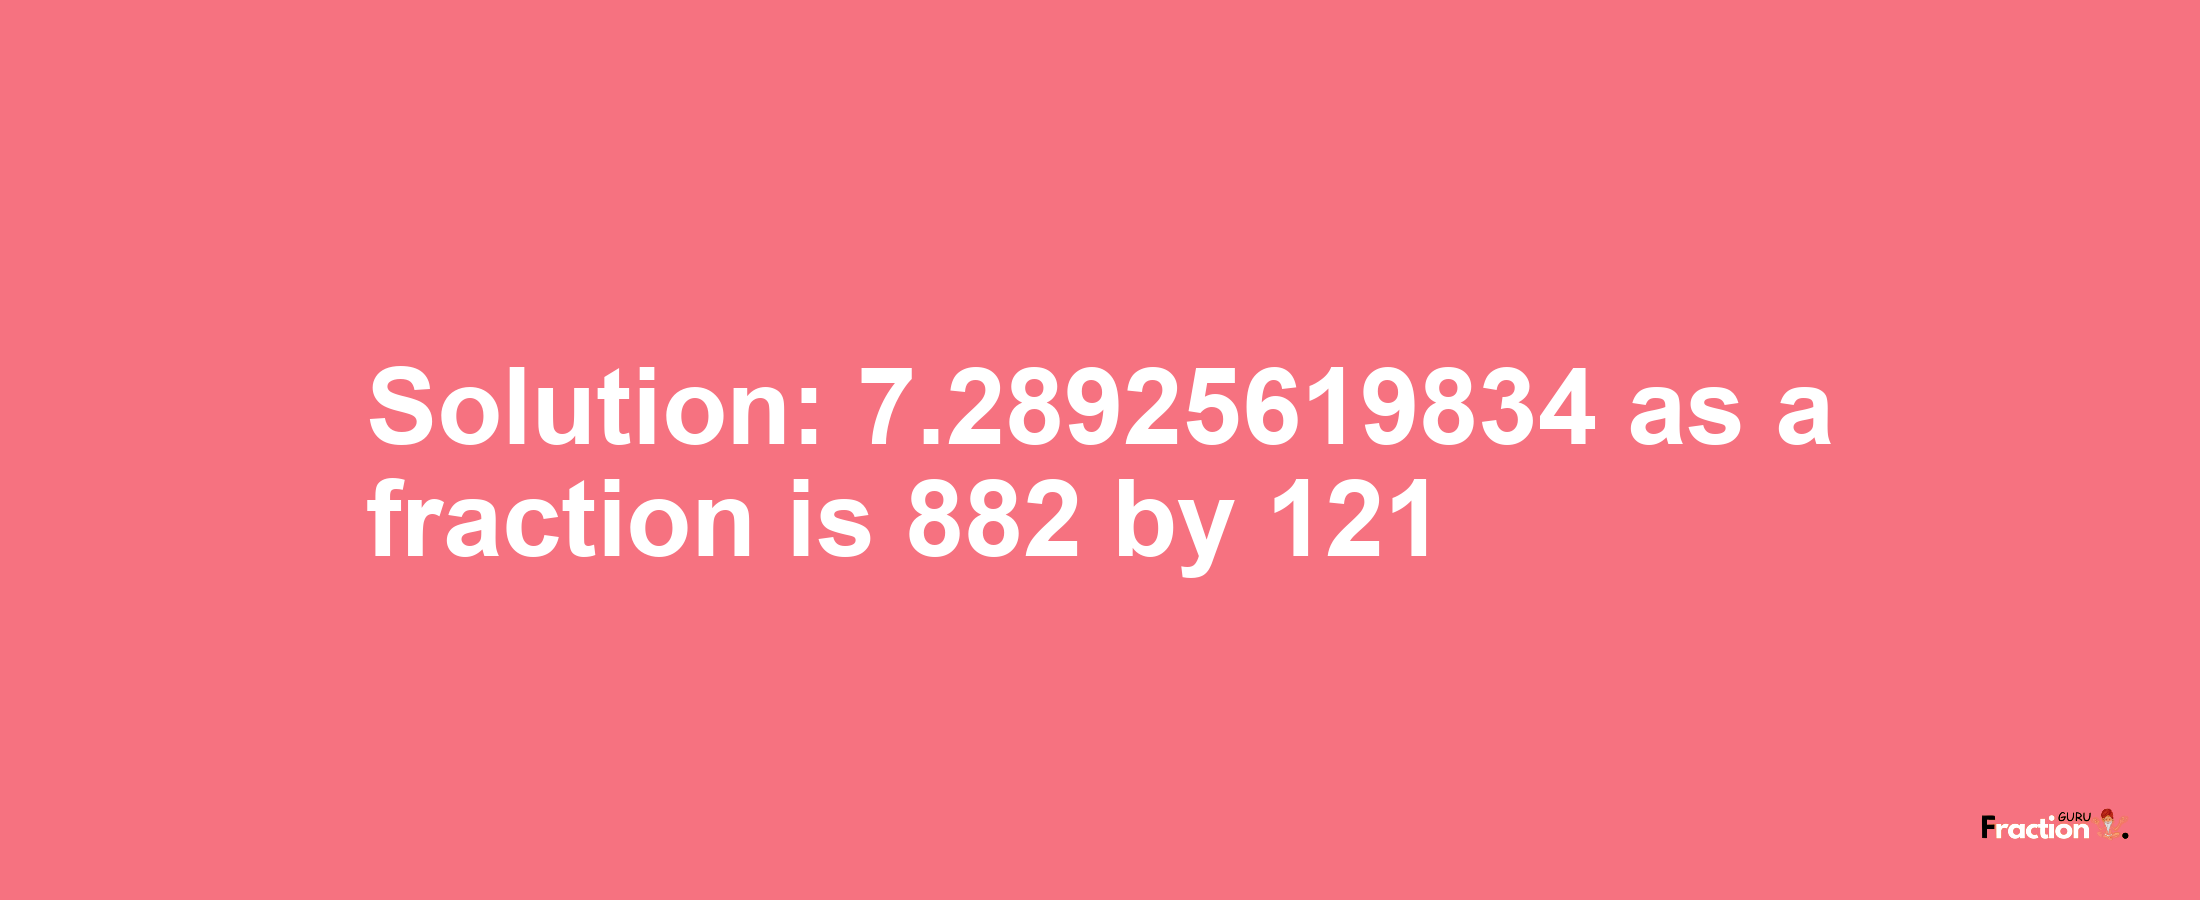 Solution:7.28925619834 as a fraction is 882/121